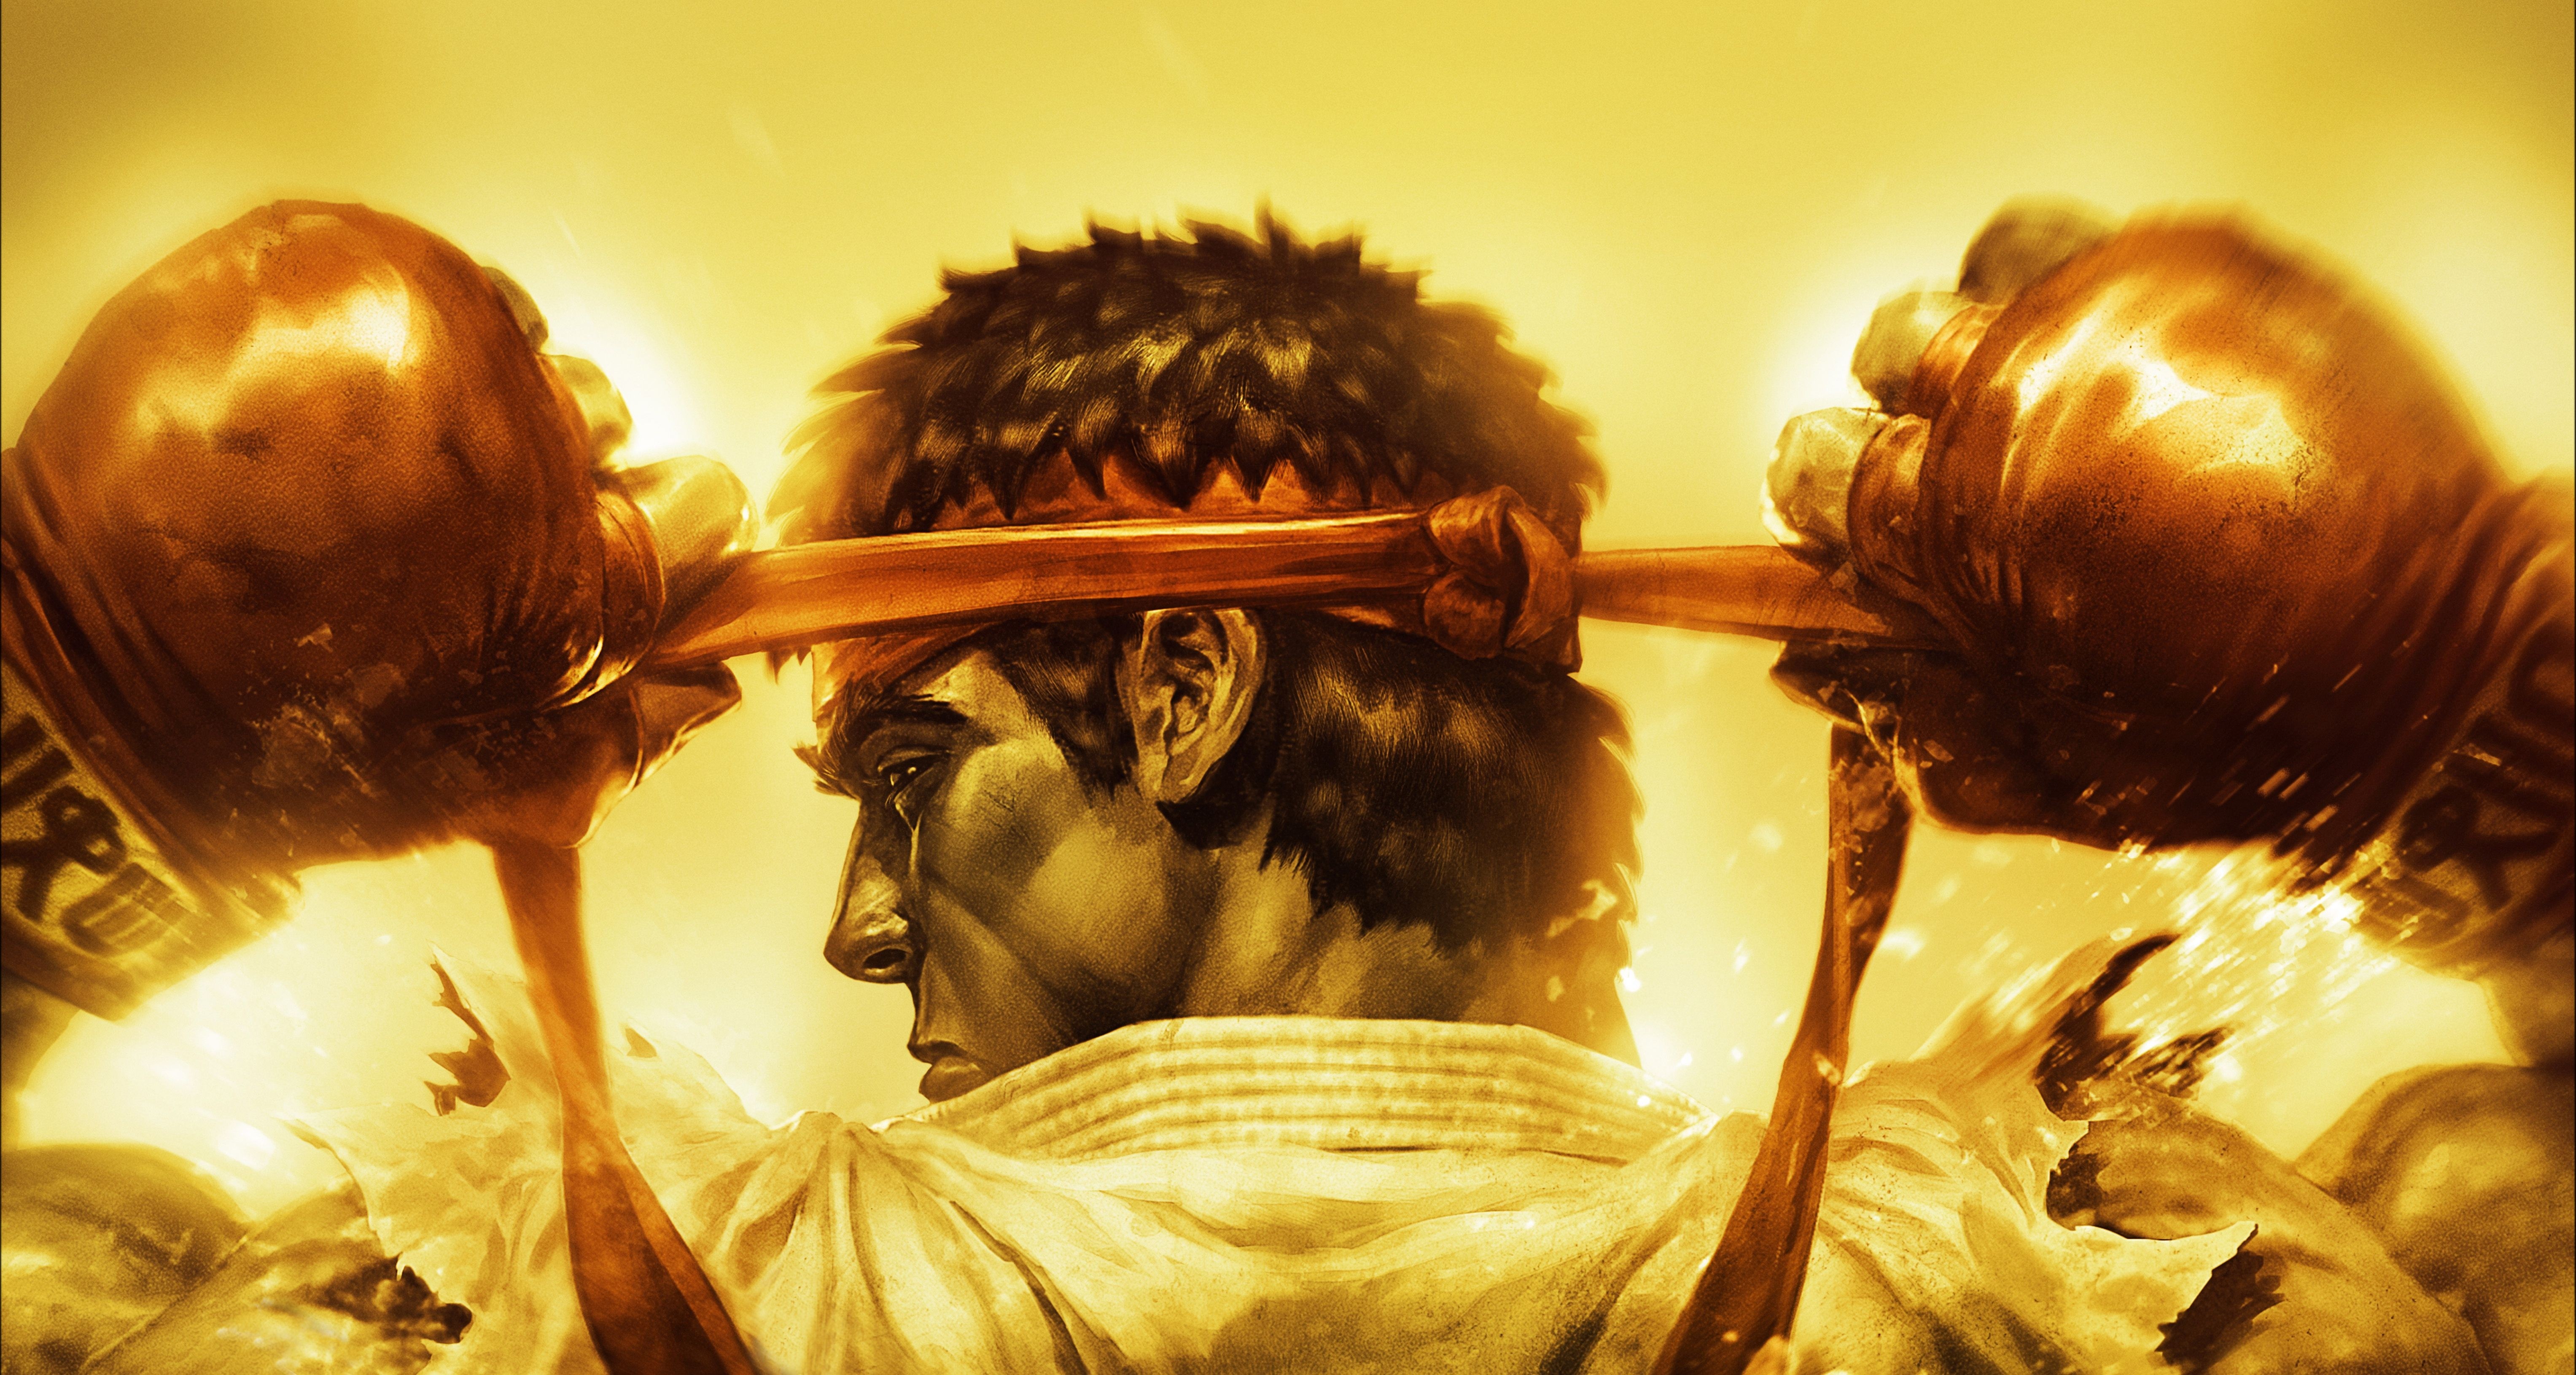 Video Game Street Fighter IV HD Wallpaper | Background Image